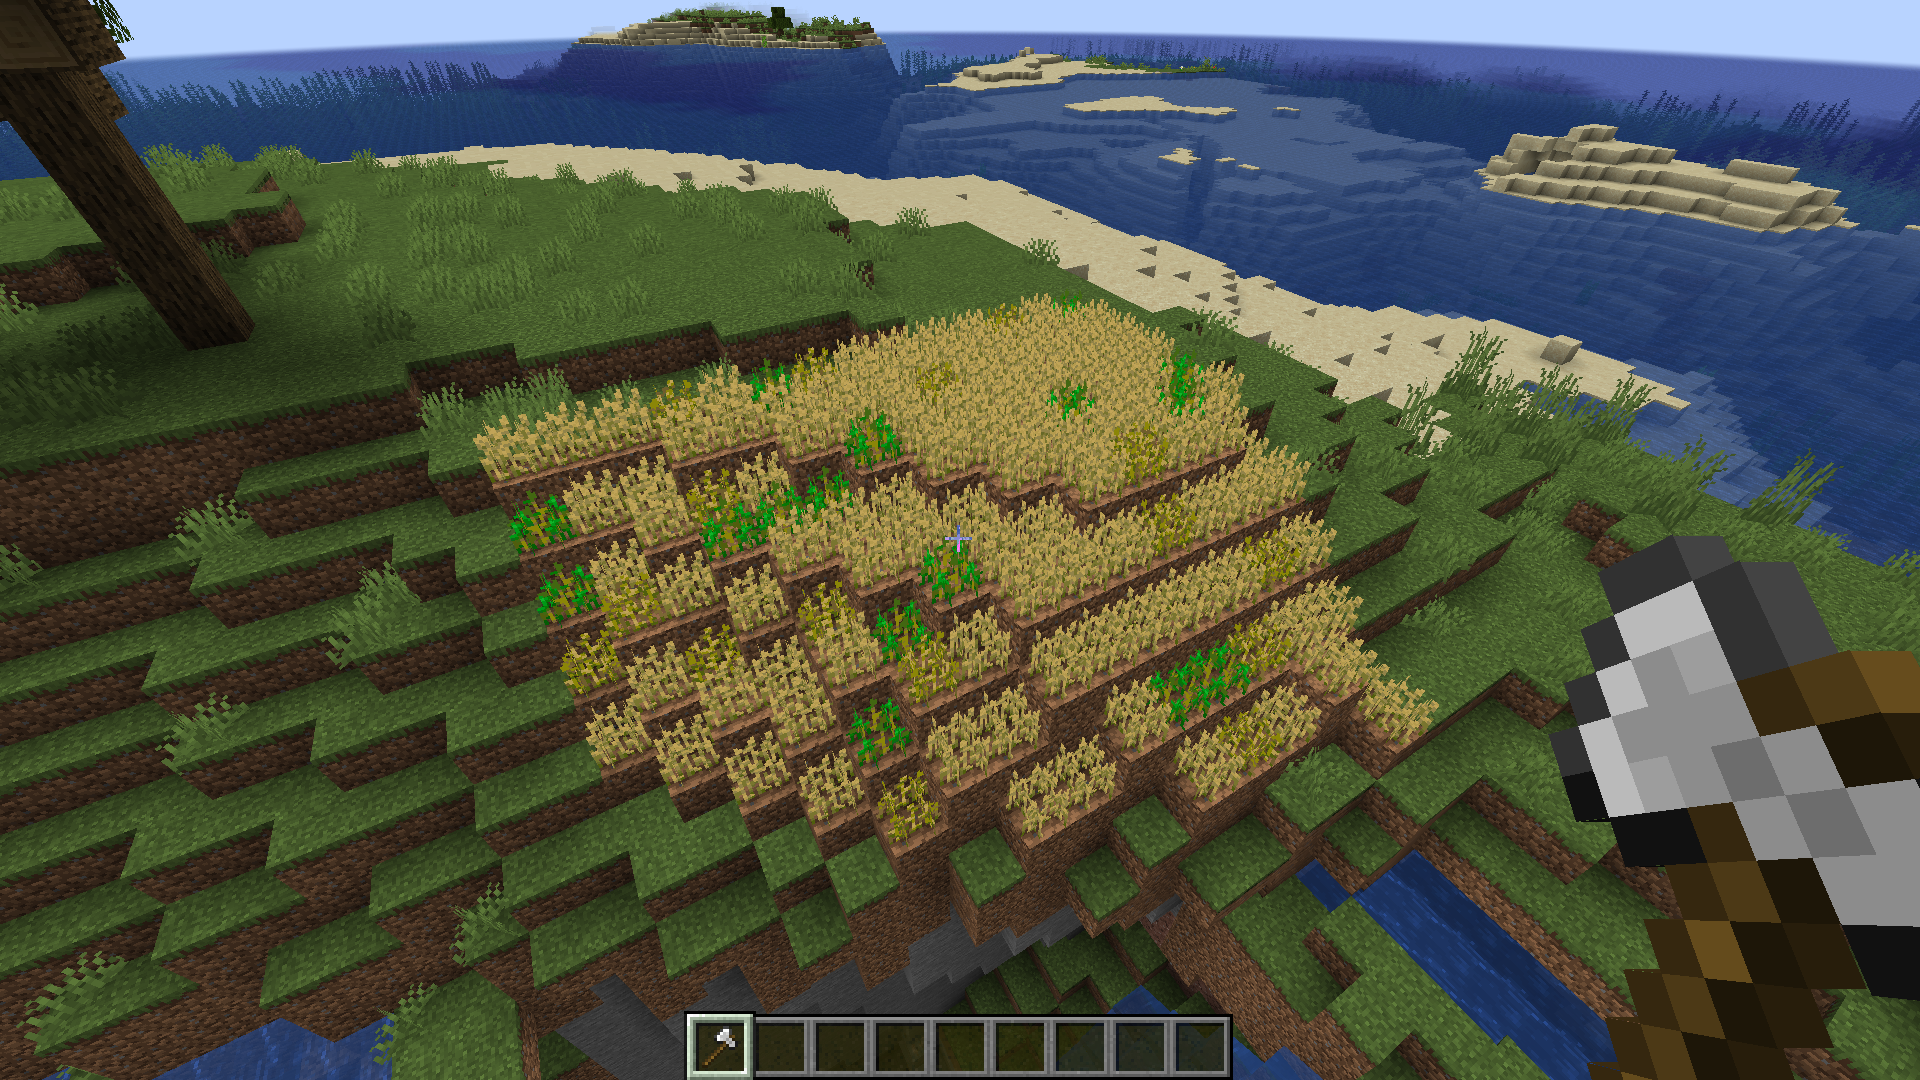 A farm created with WorldShaper. The commands here used are
1. /replace grass_block farmland
2. /replace >farmland 70%wheat[age=7],wheat[age=6],wheat[age=5]